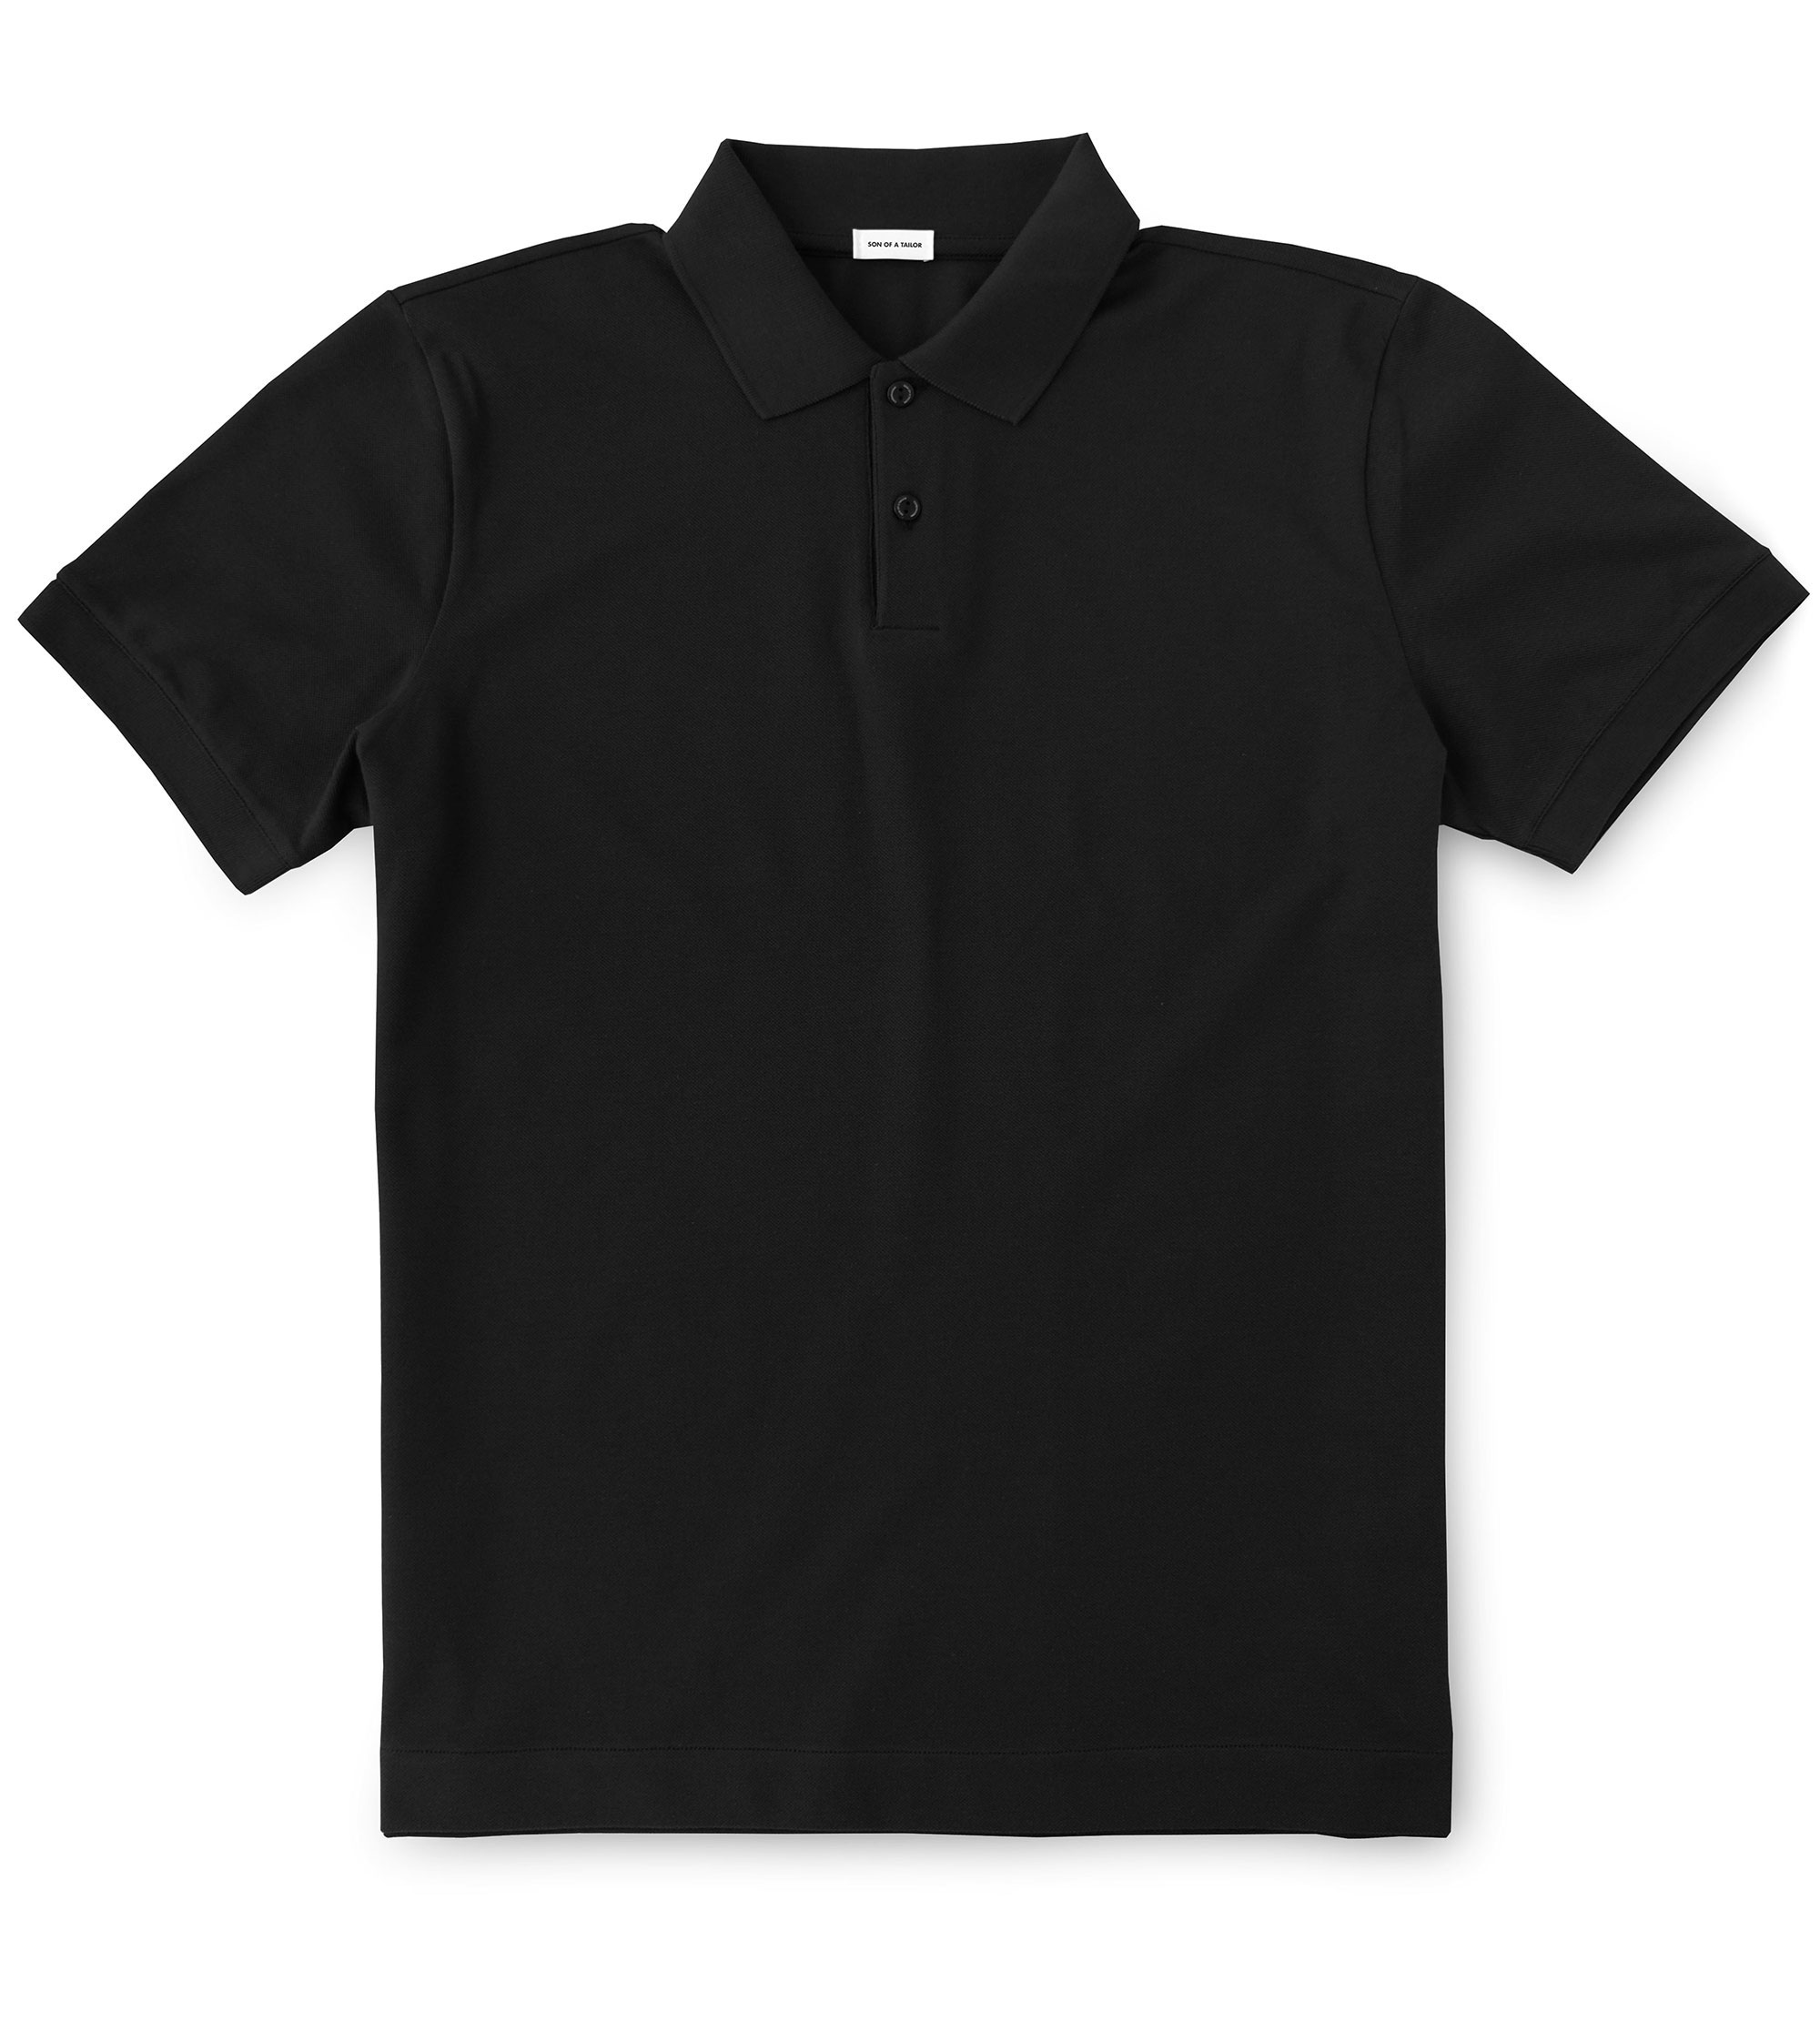 Custom Fitted Pique Polo Shirt Black | Son of a Tailor